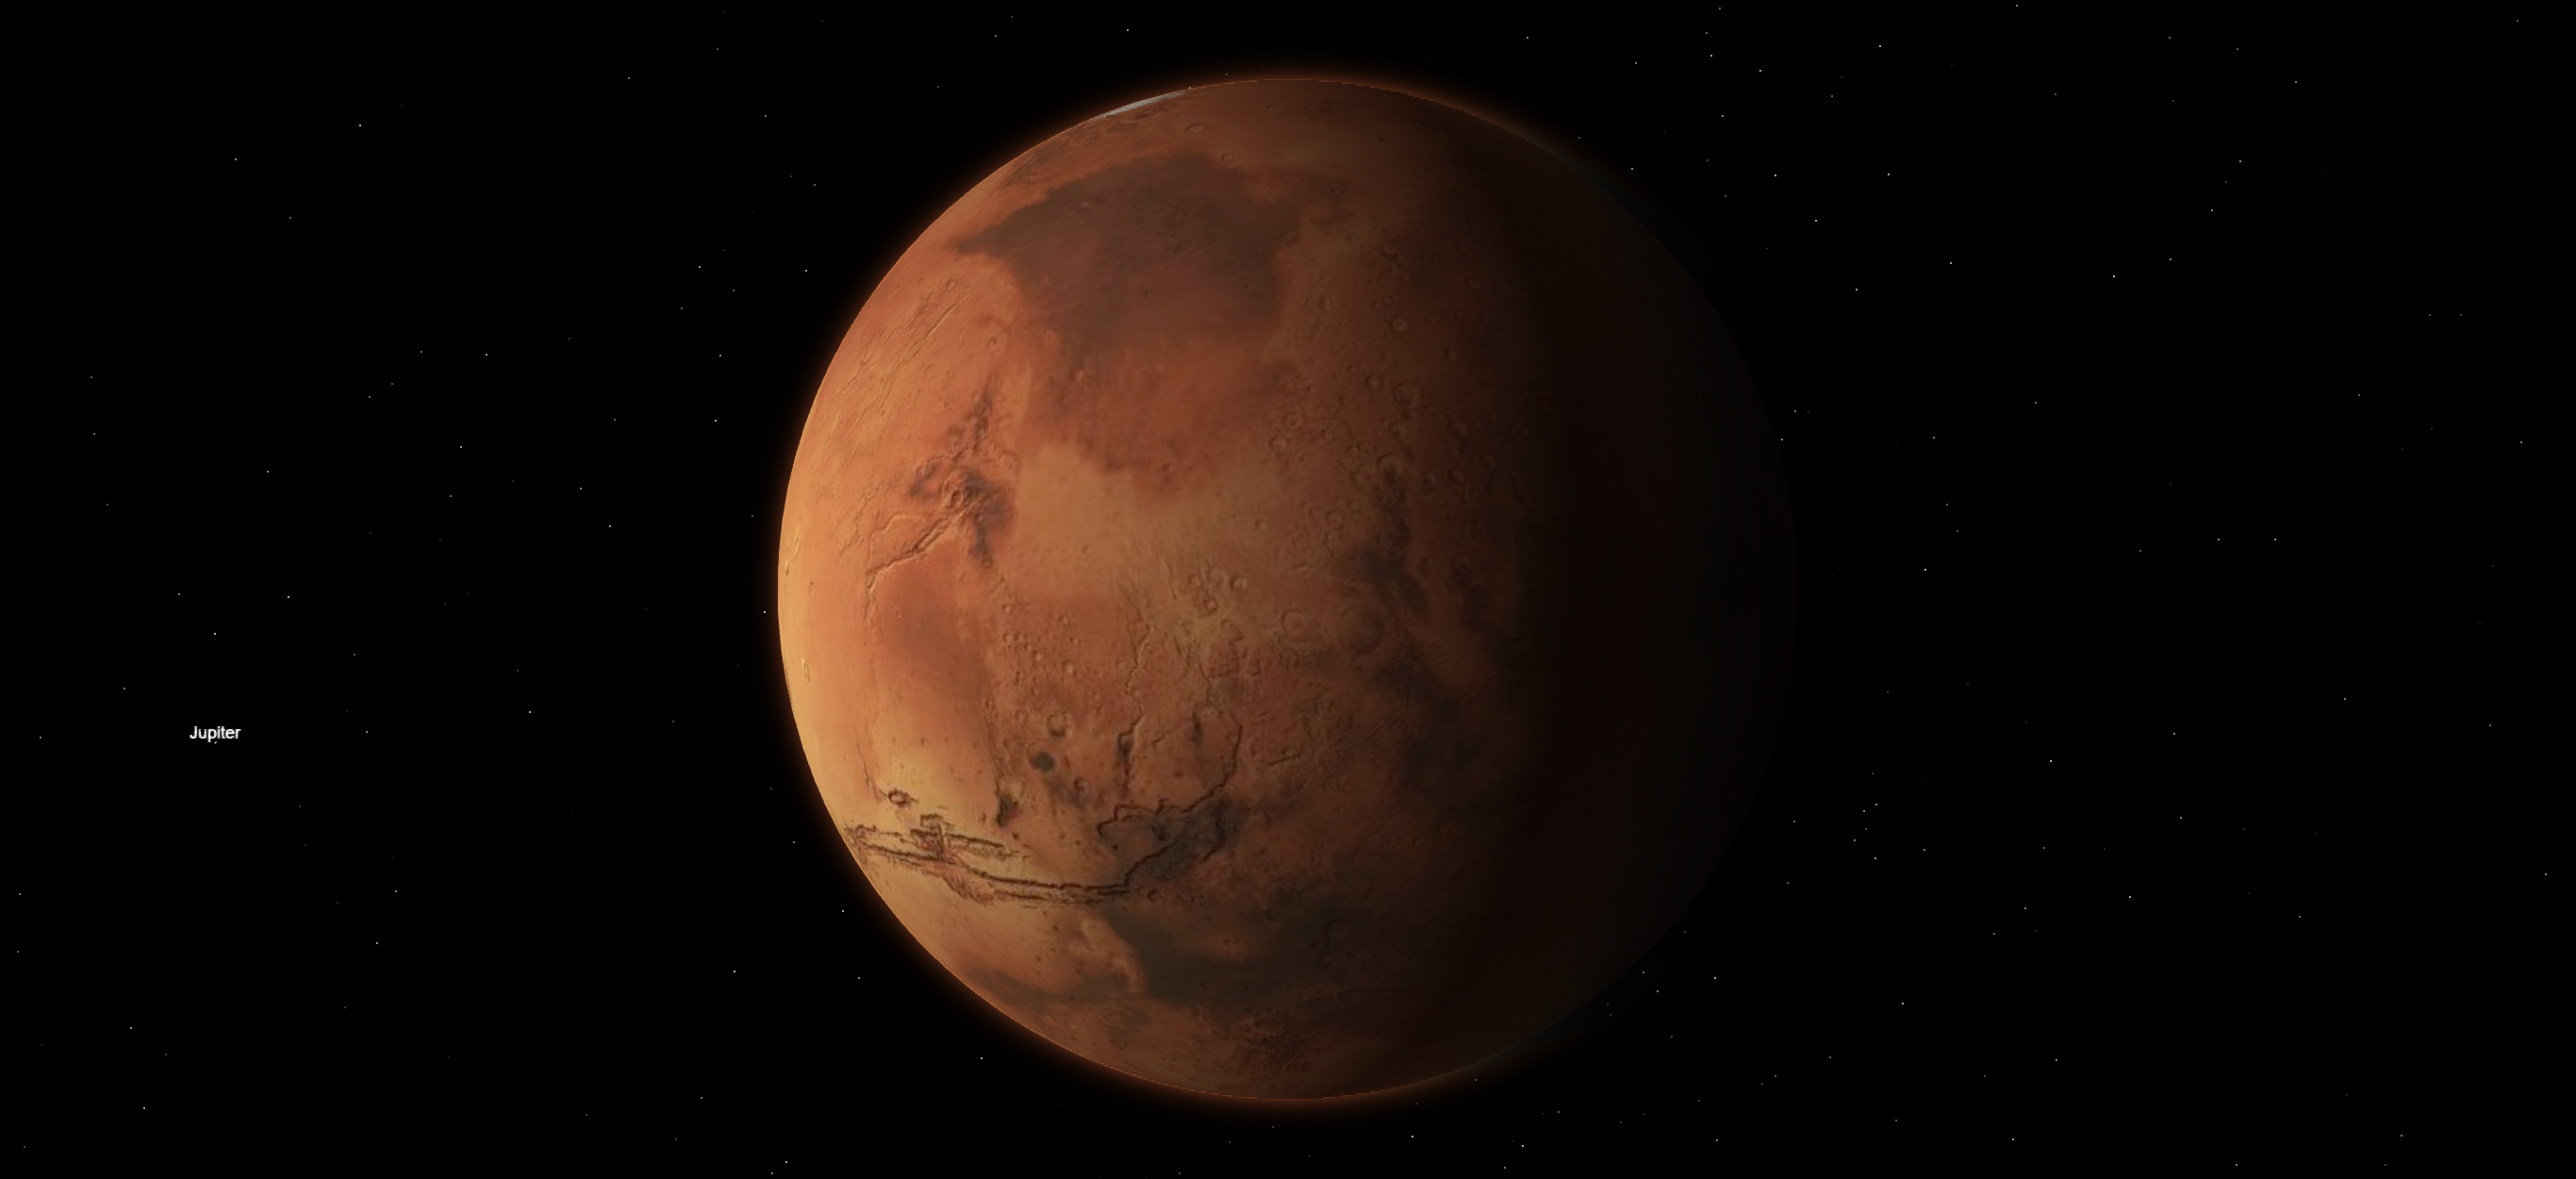 The red planet : Mars